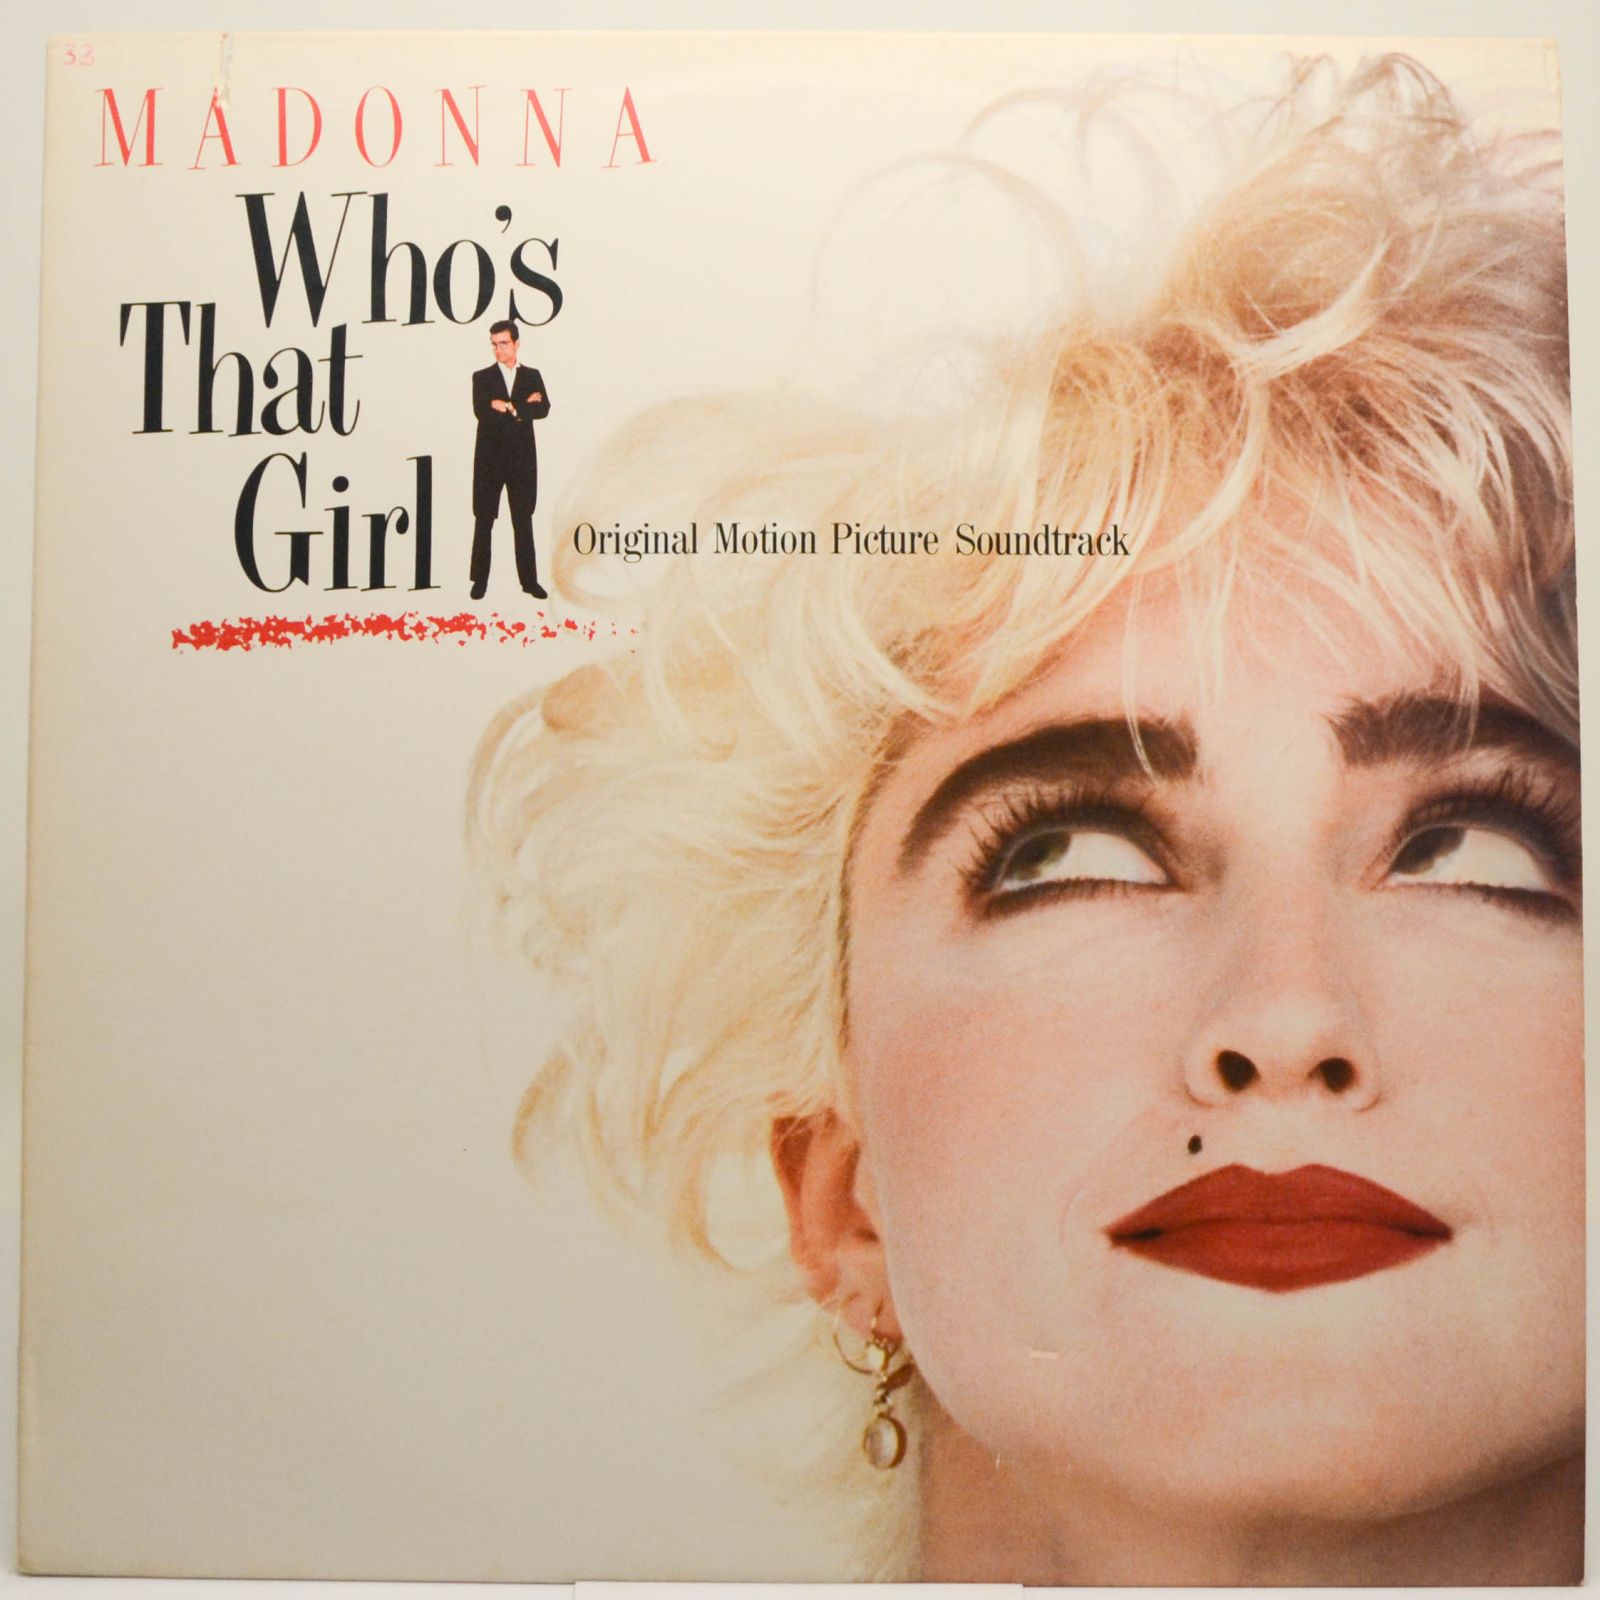 Madonna — Who's That Girl (Original Motion Picture Soundtrack), 1987